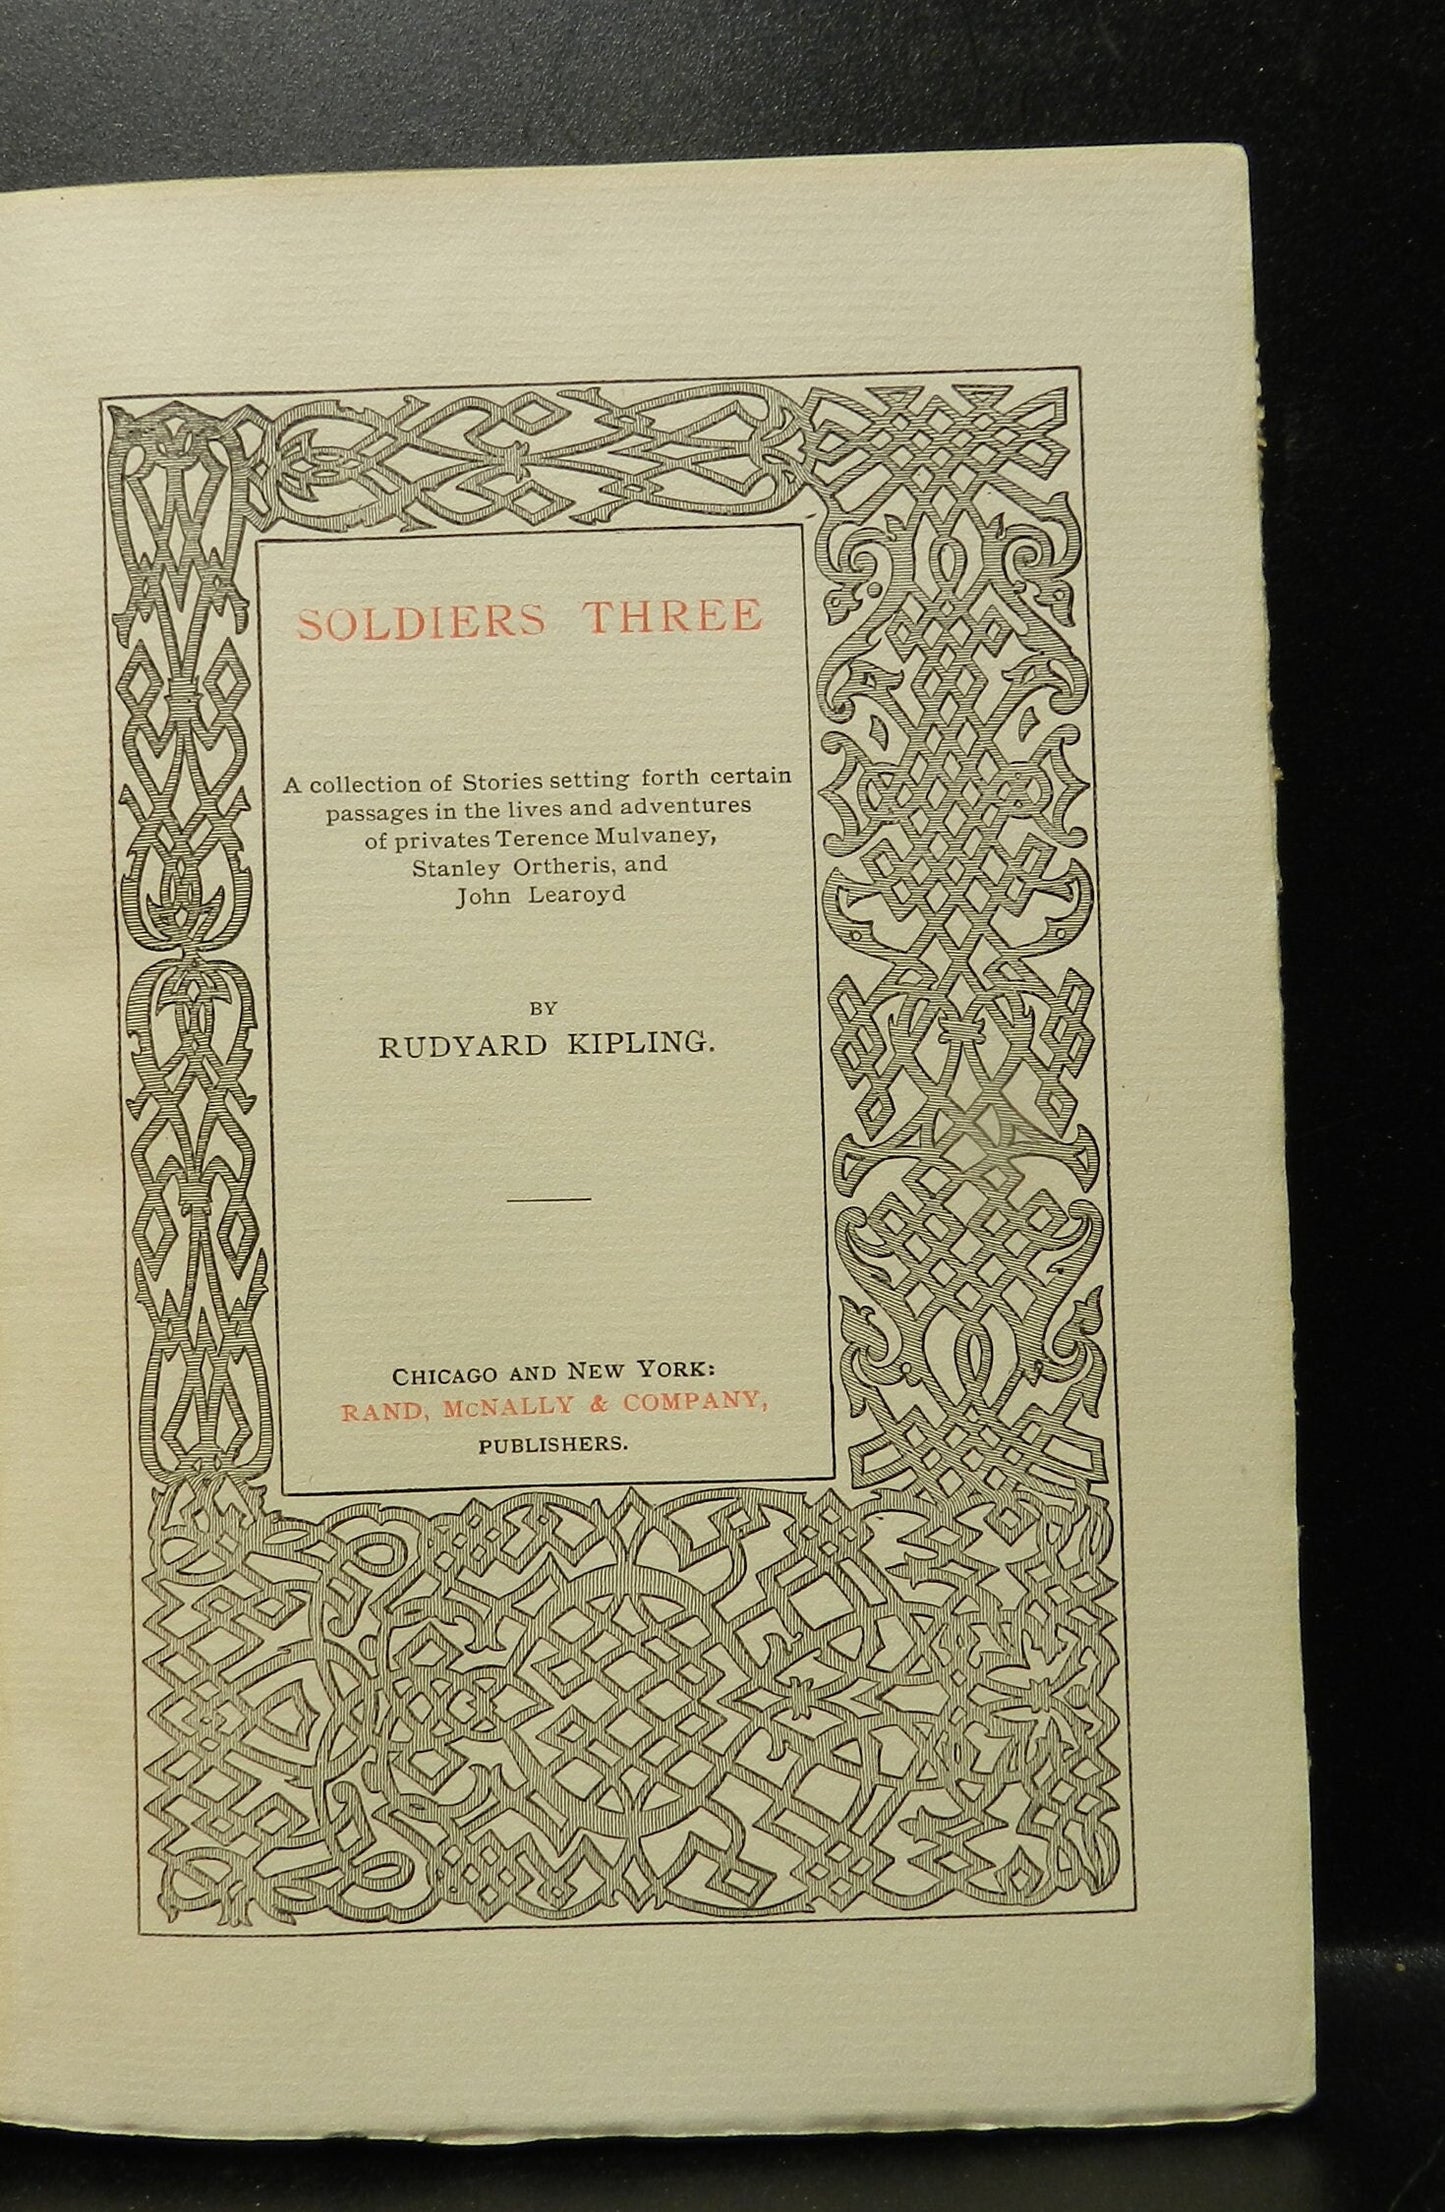 Antique Book "Soldiers Three" by R. Kipling  VG Condition  Unusual Binding Beautiful  Spine Gilding   Deckle Edge